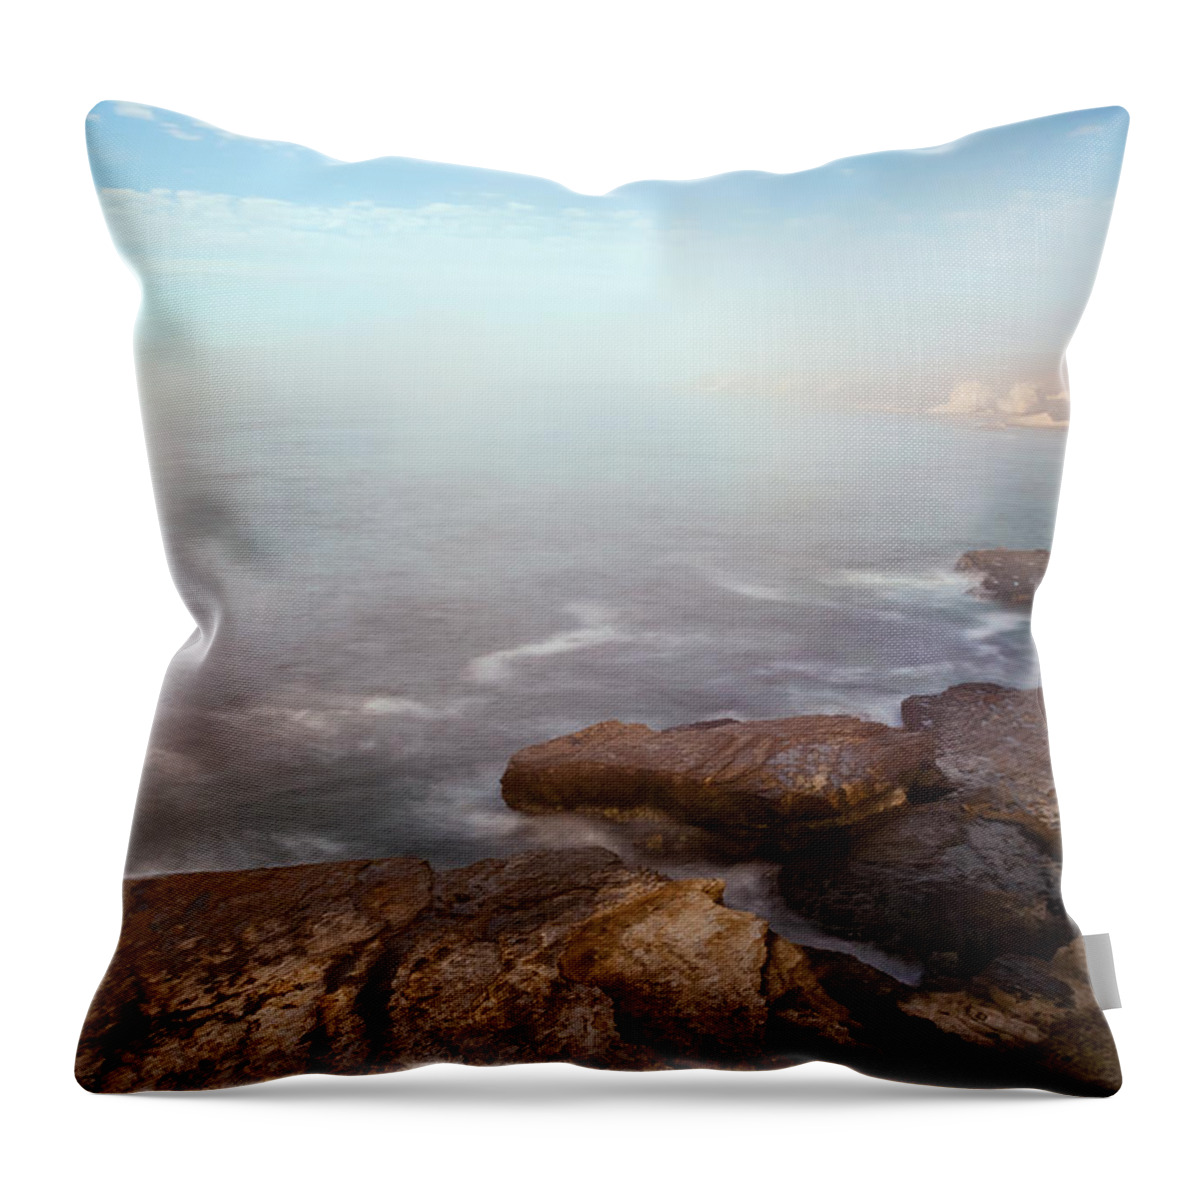 Landscape Throw Pillow featuring the photograph At Clearing by Jonathan Nguyen